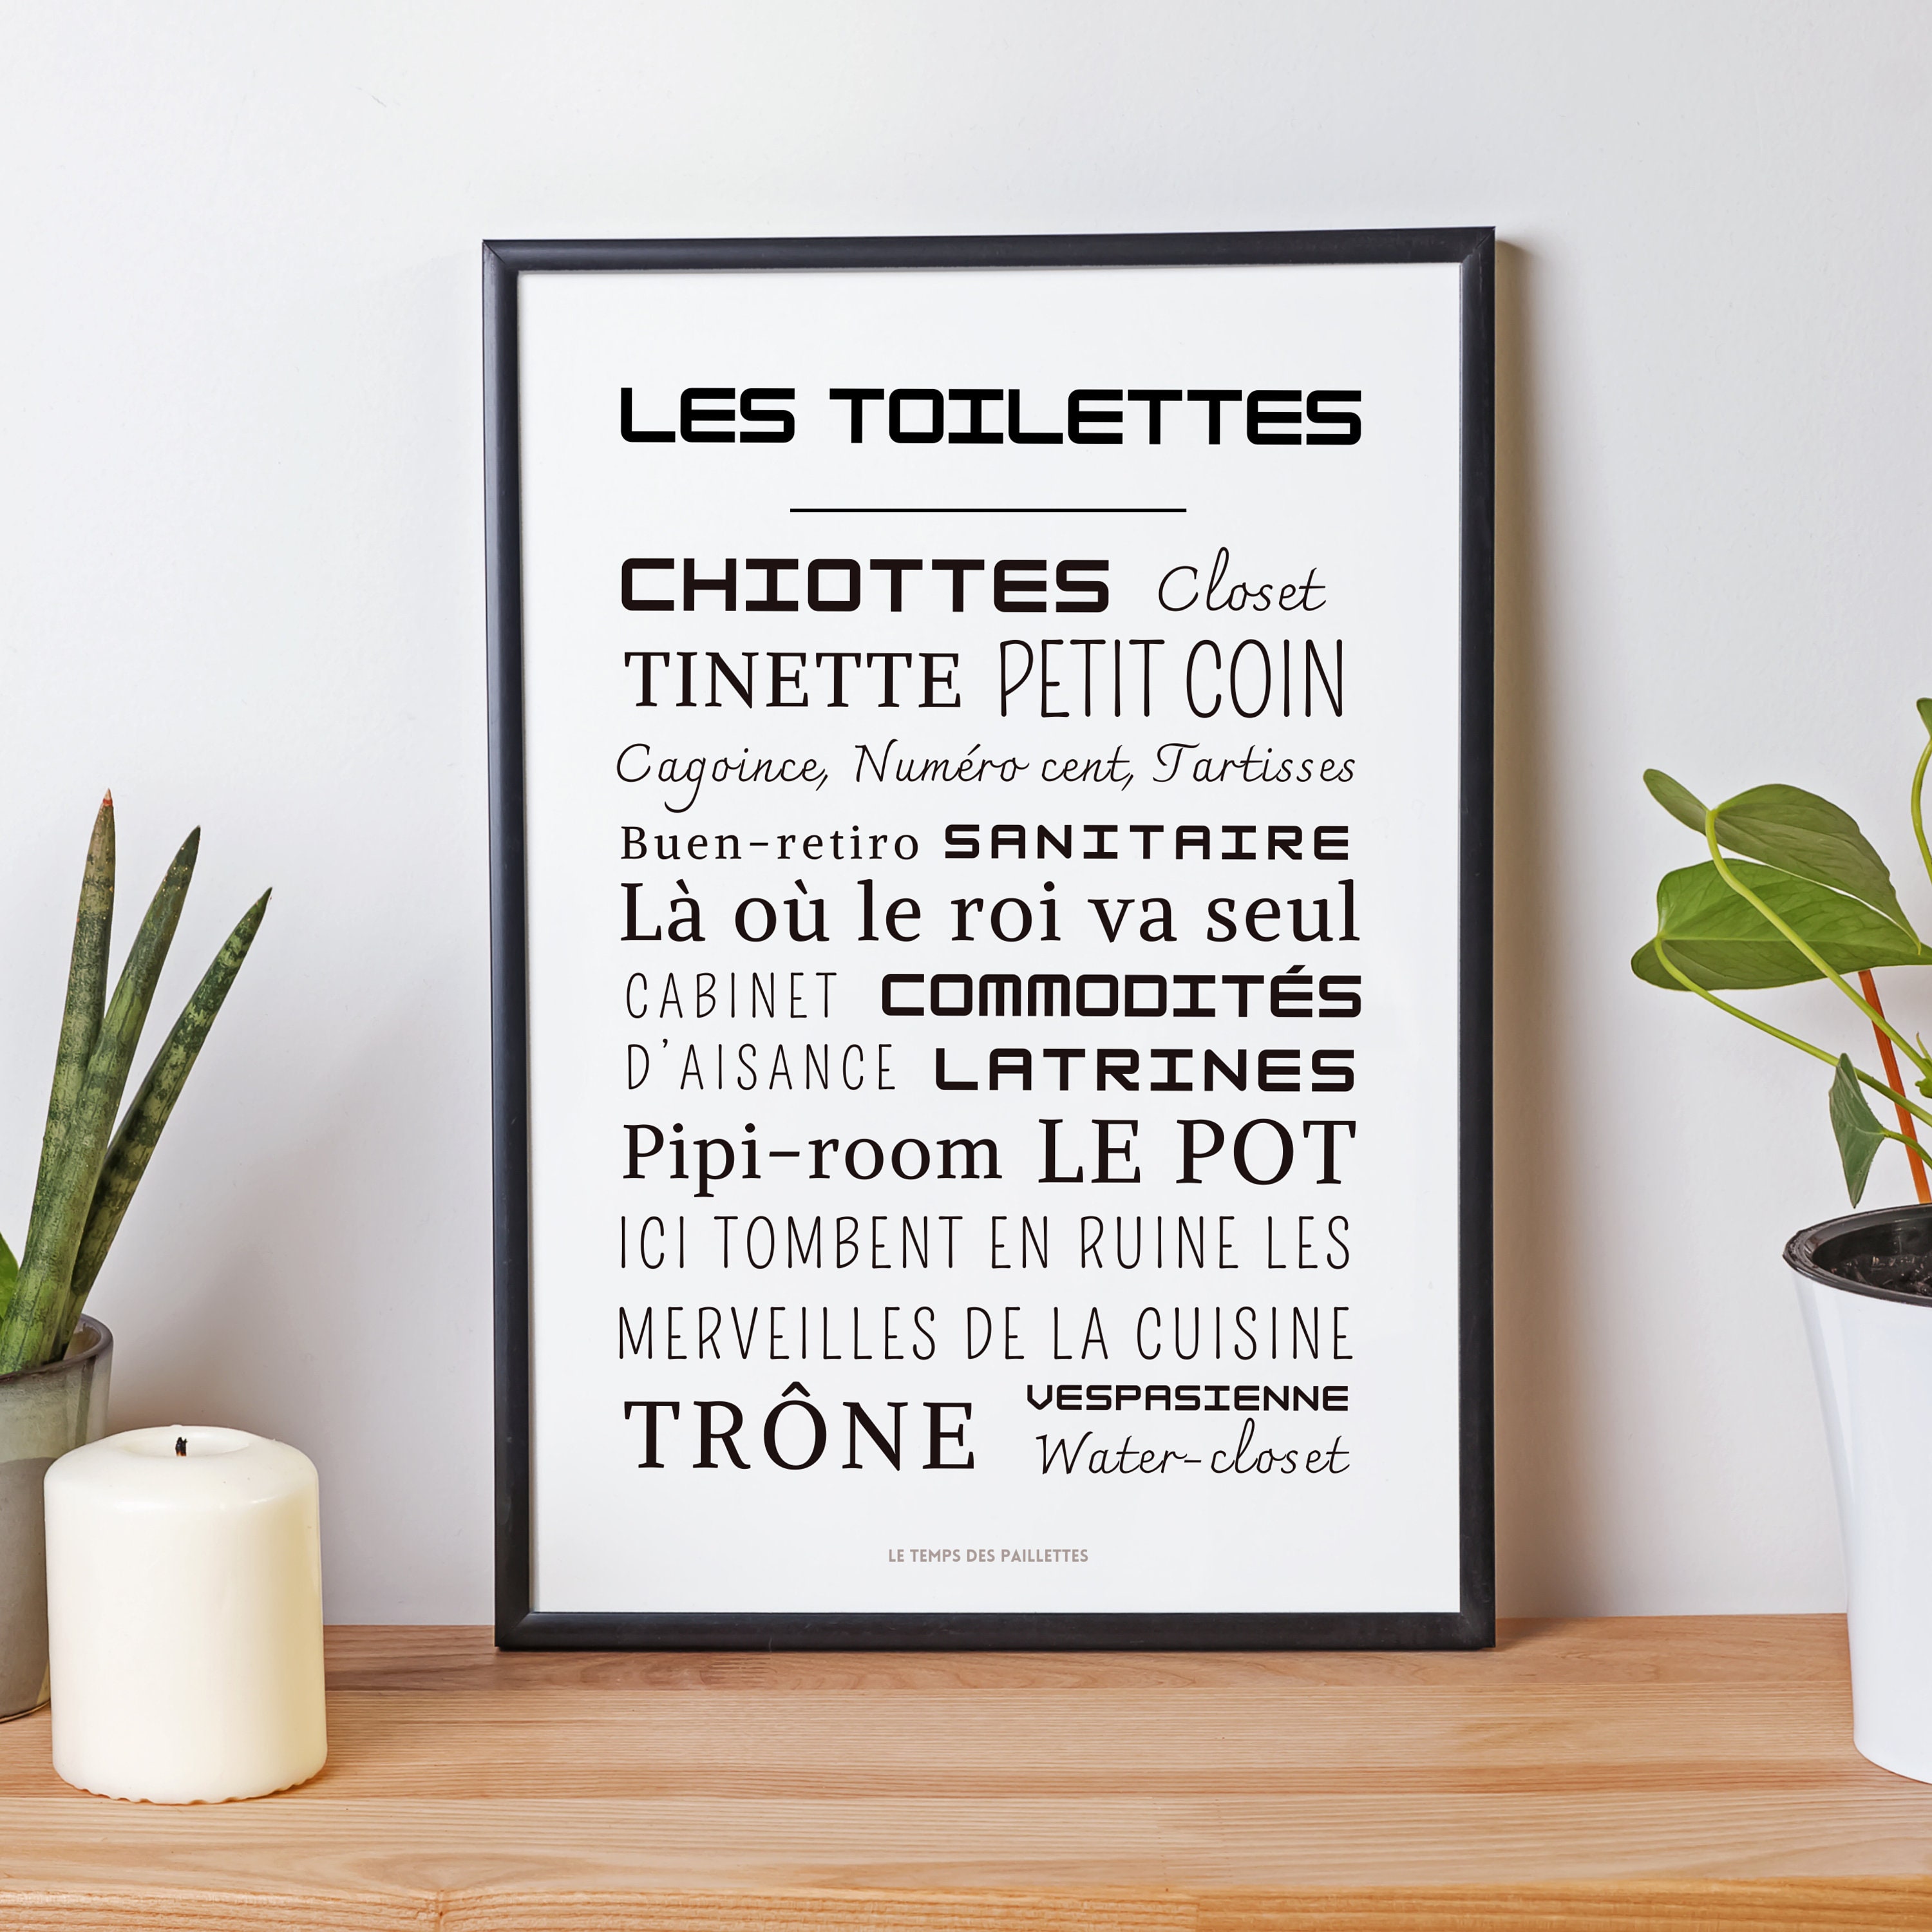 Minimalist Toilet and Bathroom Poster Toilet Poster by Le Temps